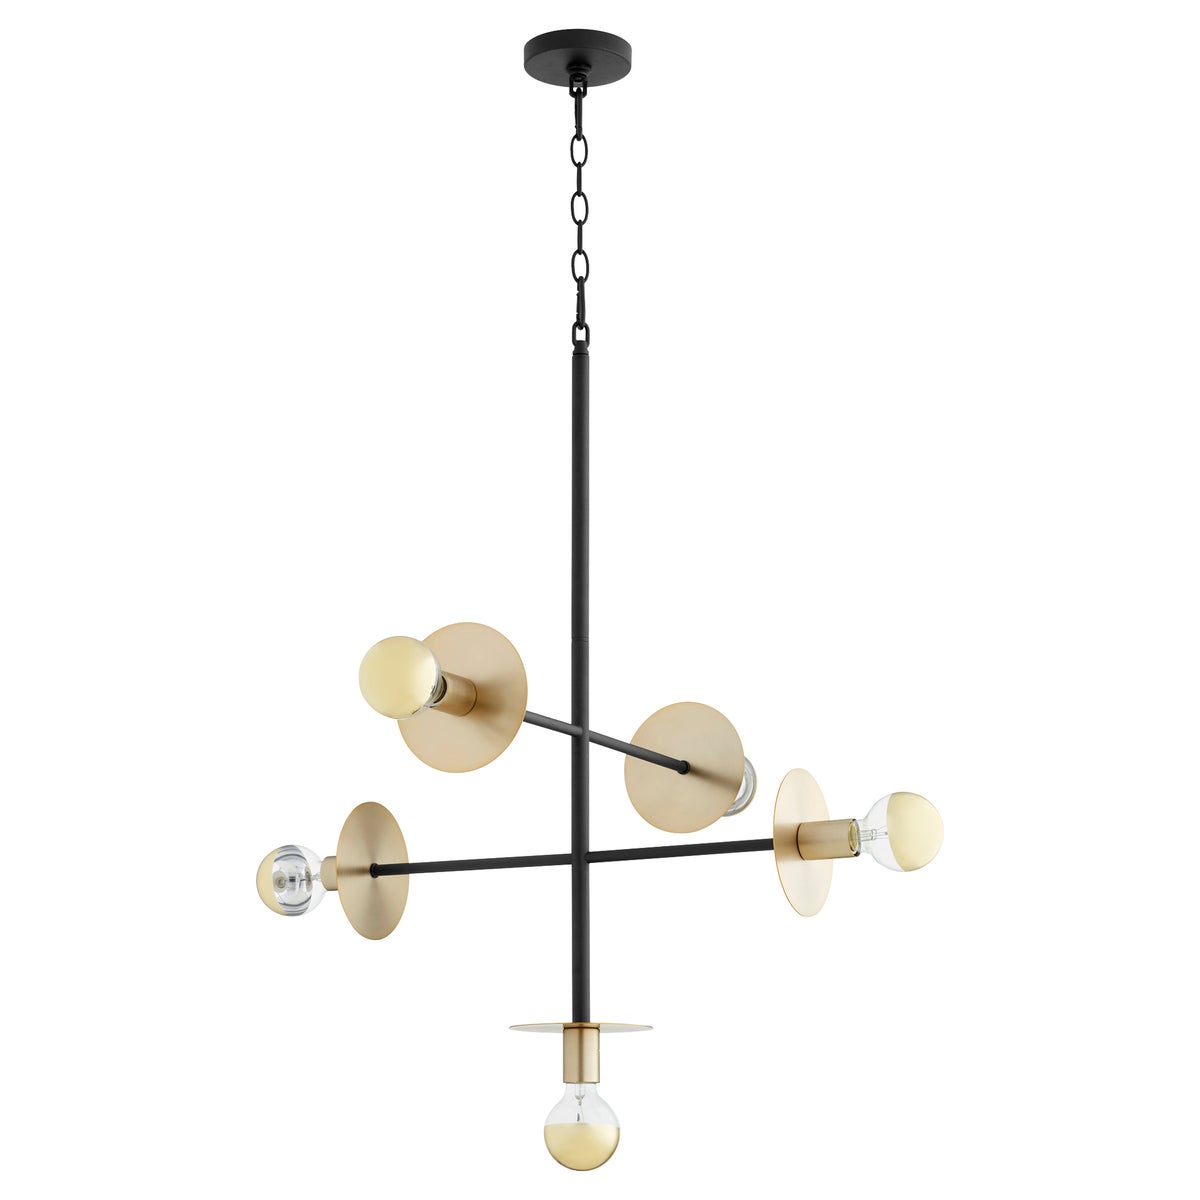 Contemporary pendant light with gold circles and light bulbs, providing multi-directional radiance. Two-toned design in noir and aged brass finishes. Damp Listed for indoor/outdoor installation. 18.5&quot;W x 24&quot;H.